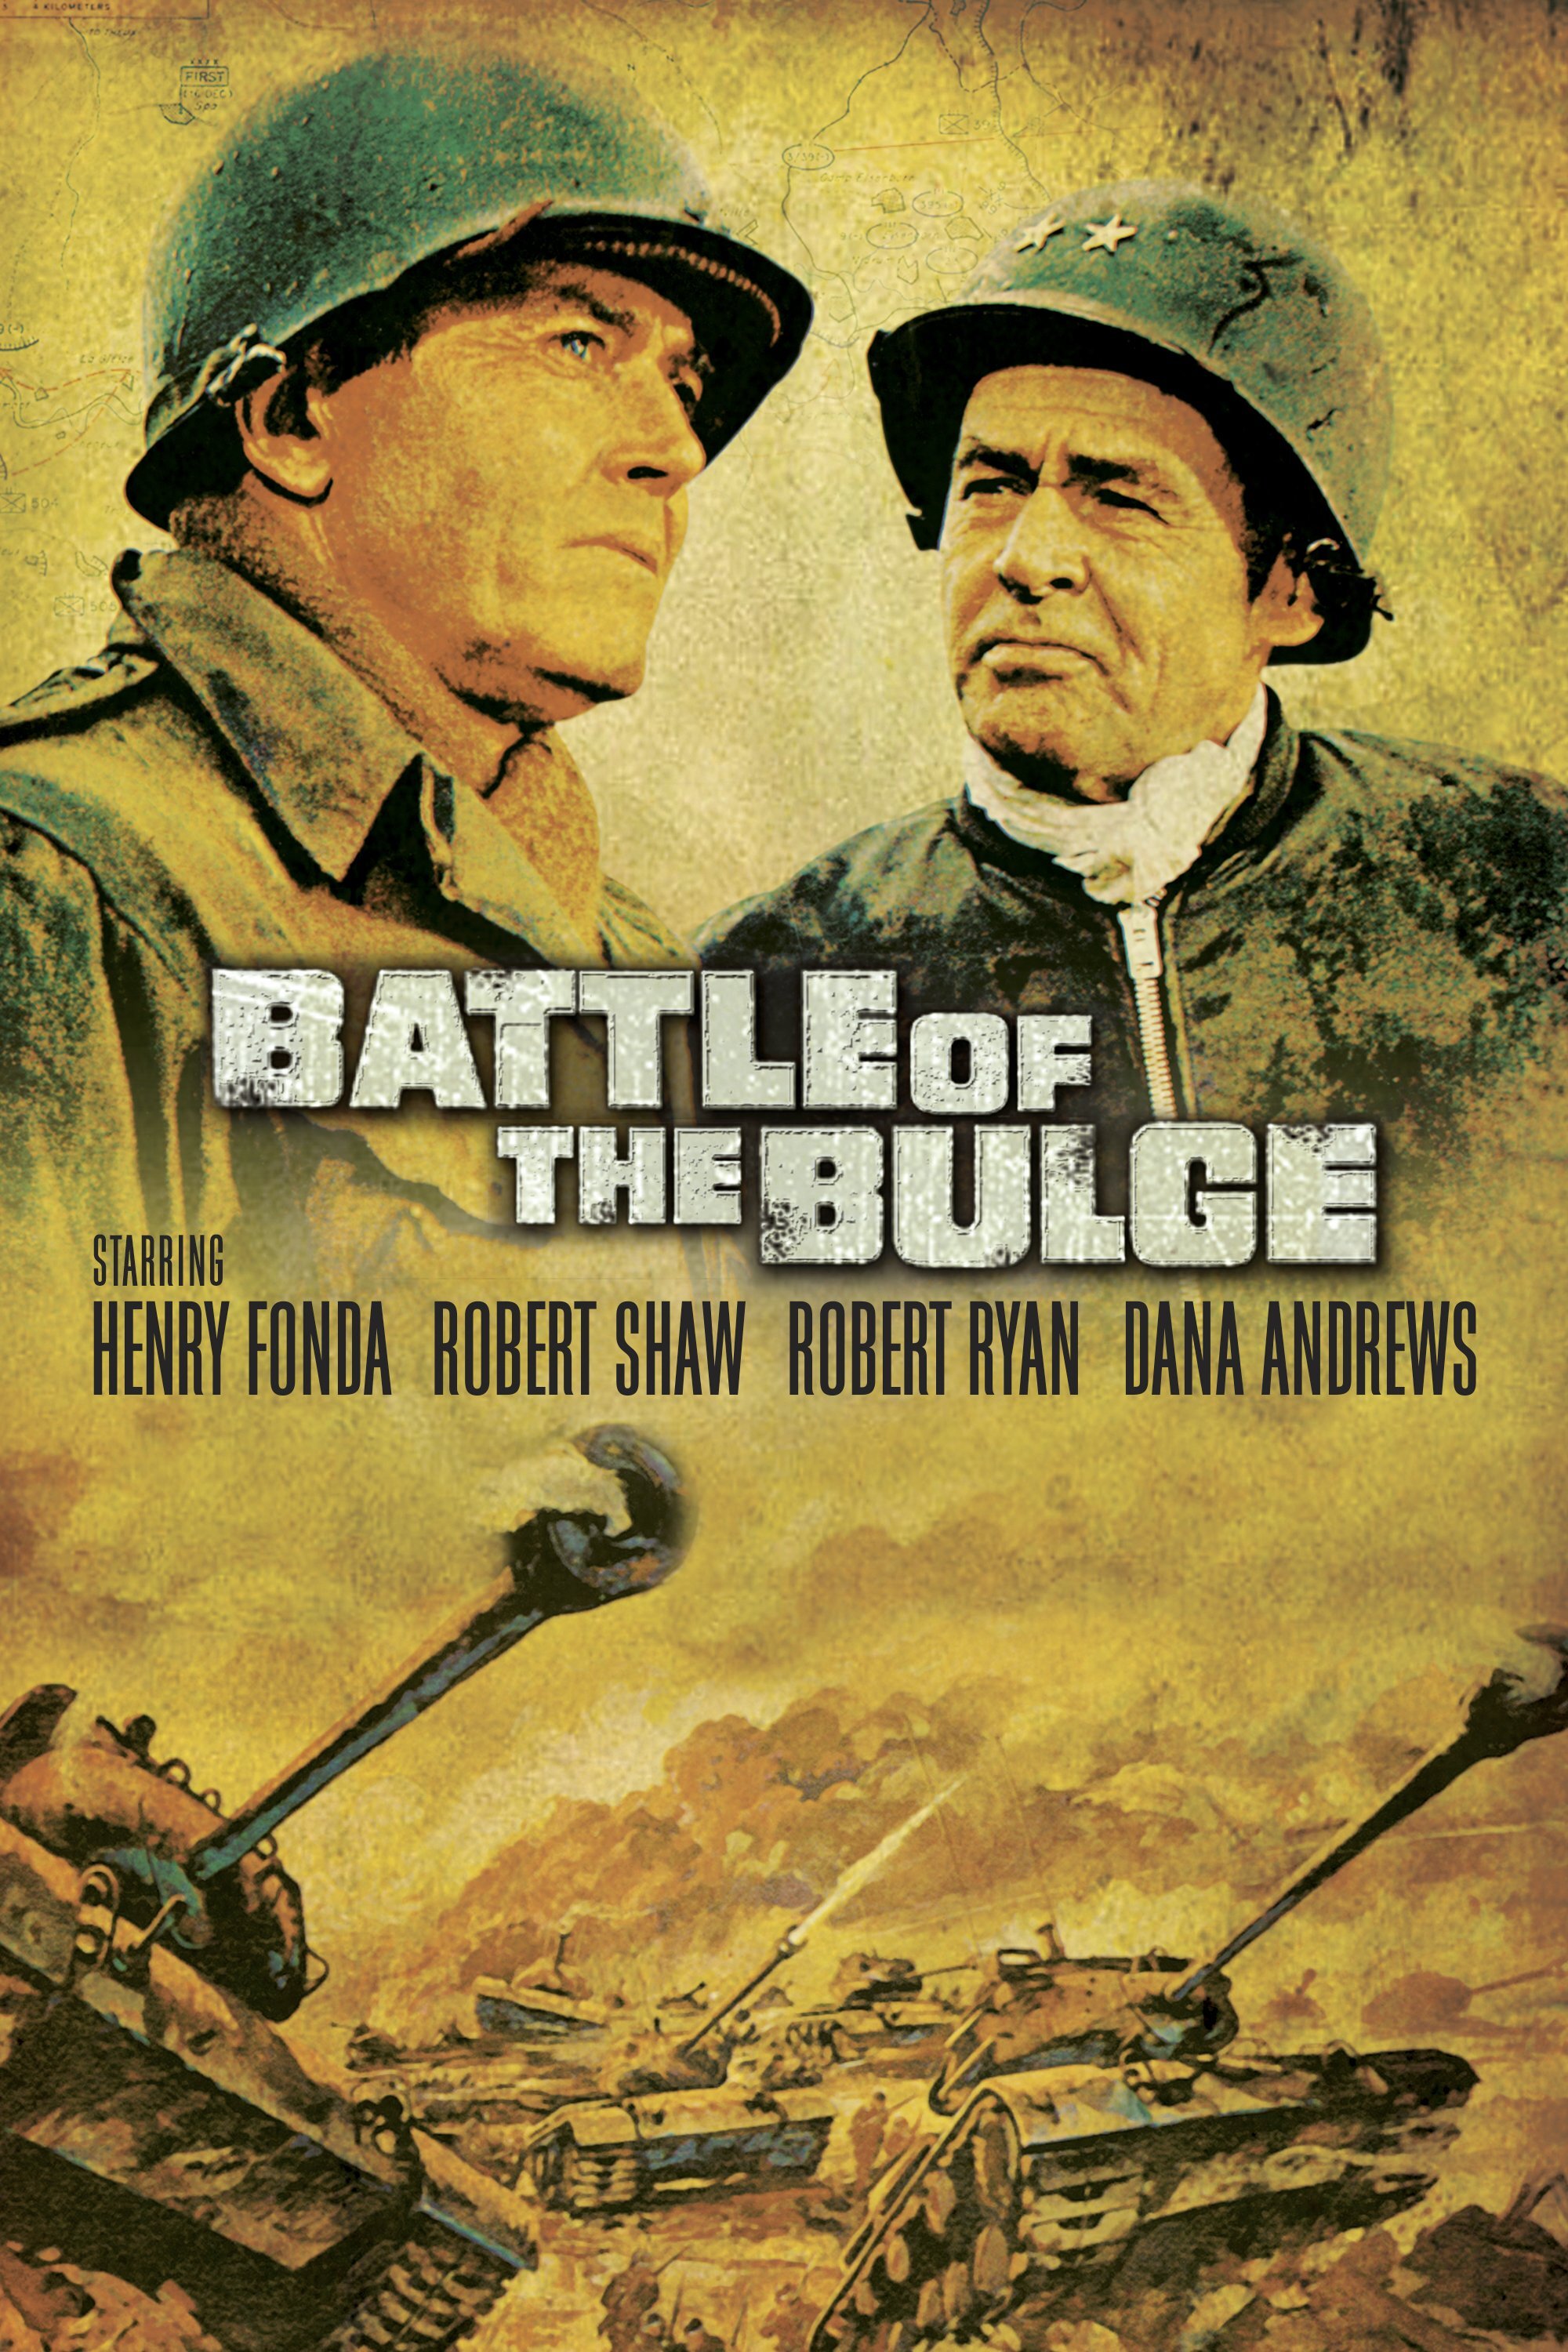 Battle Of The Bulge (DVD Widescreen) - DVD [ 1965 ]  - War Movies On DVD - Movies On GRUV